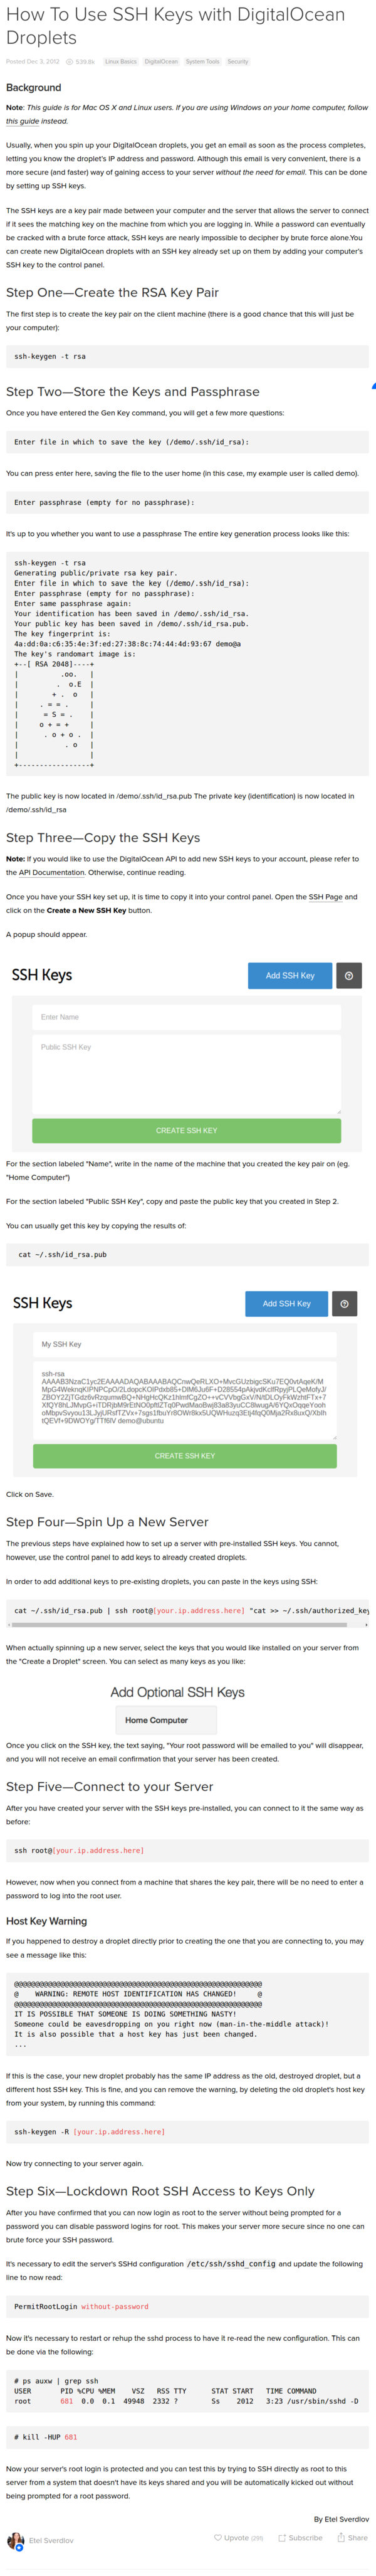 ./20161029-1155-cet-how-to-use-ssh-keys-with-digitalocean-droplets-1.png